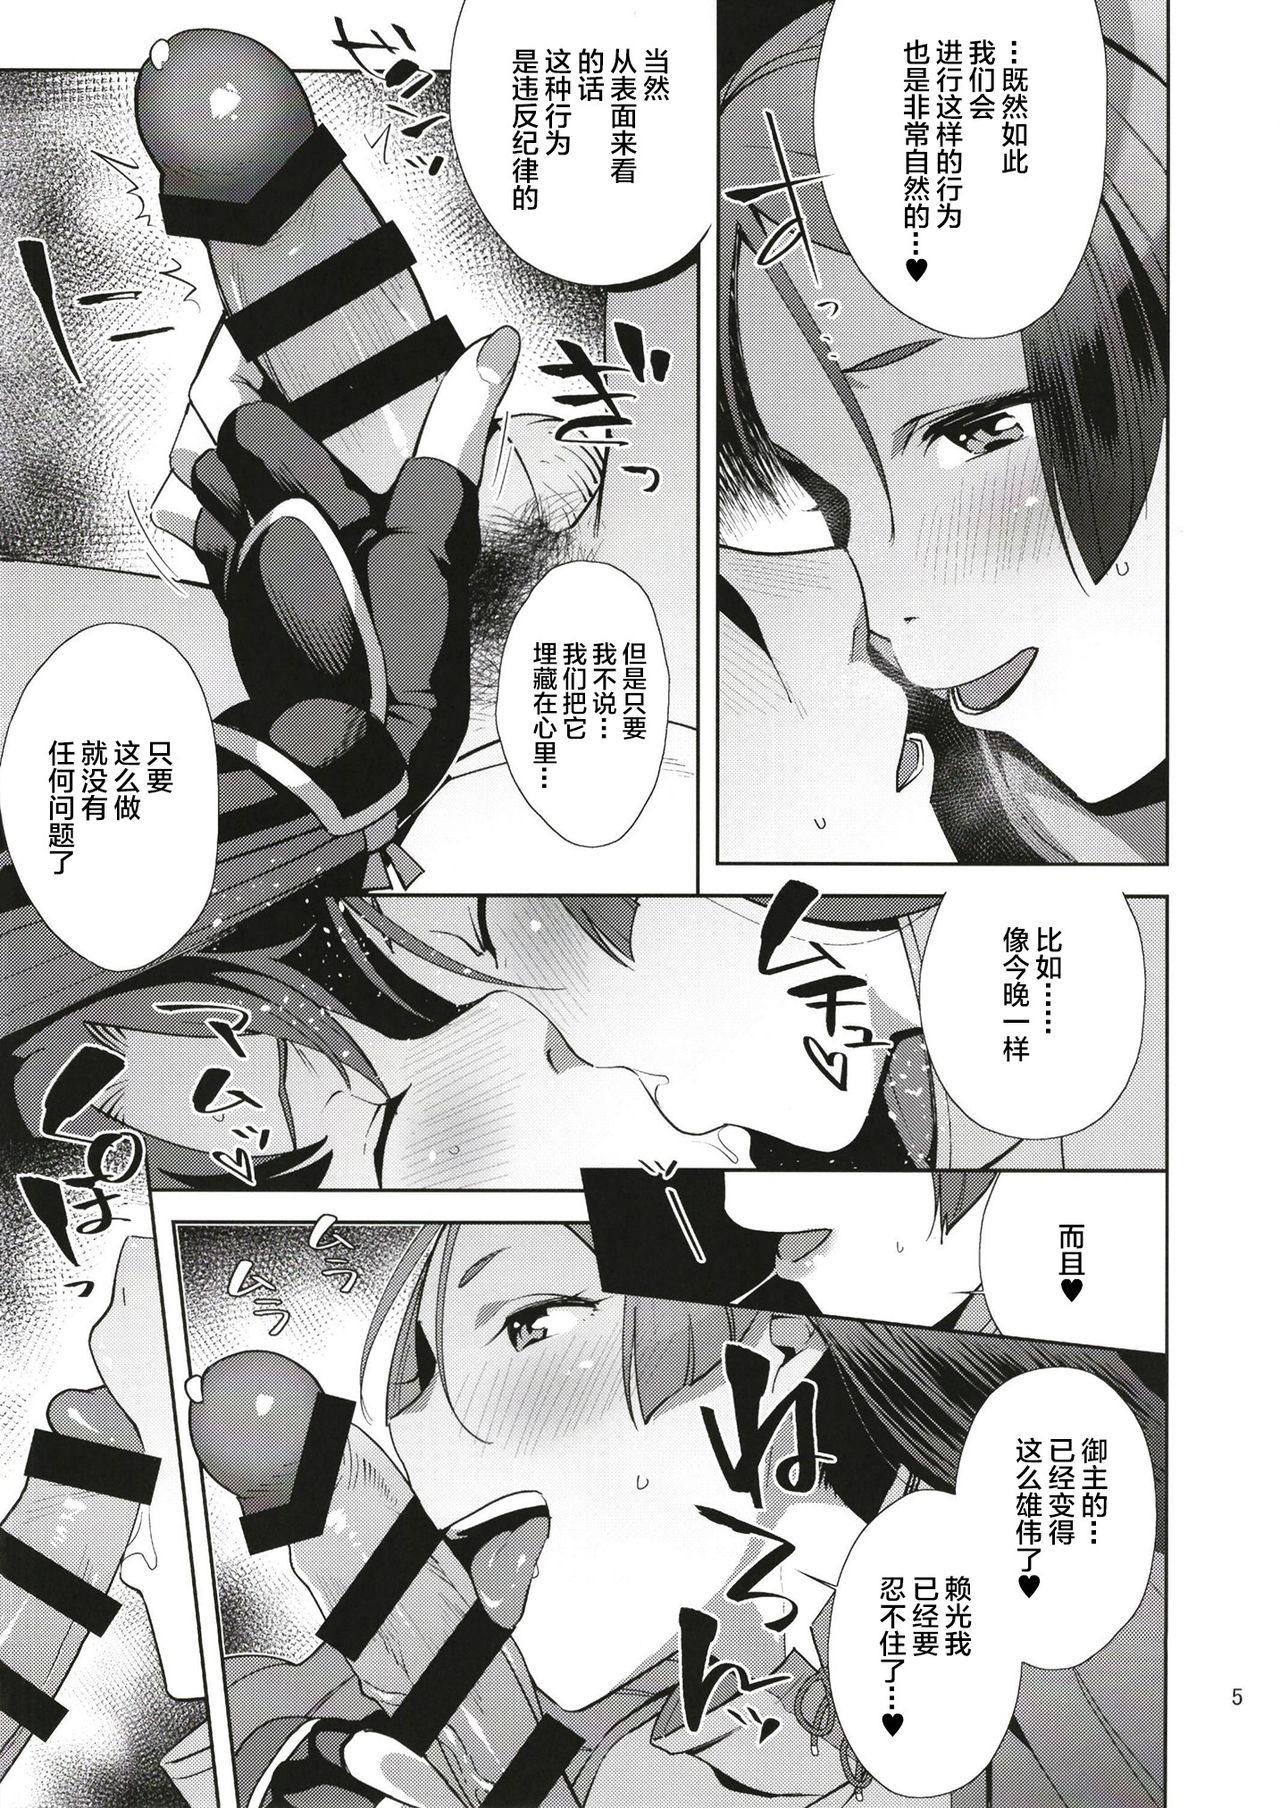 Doggystyle Raikou Sentimental - Fate grand order Cougars - Page 4